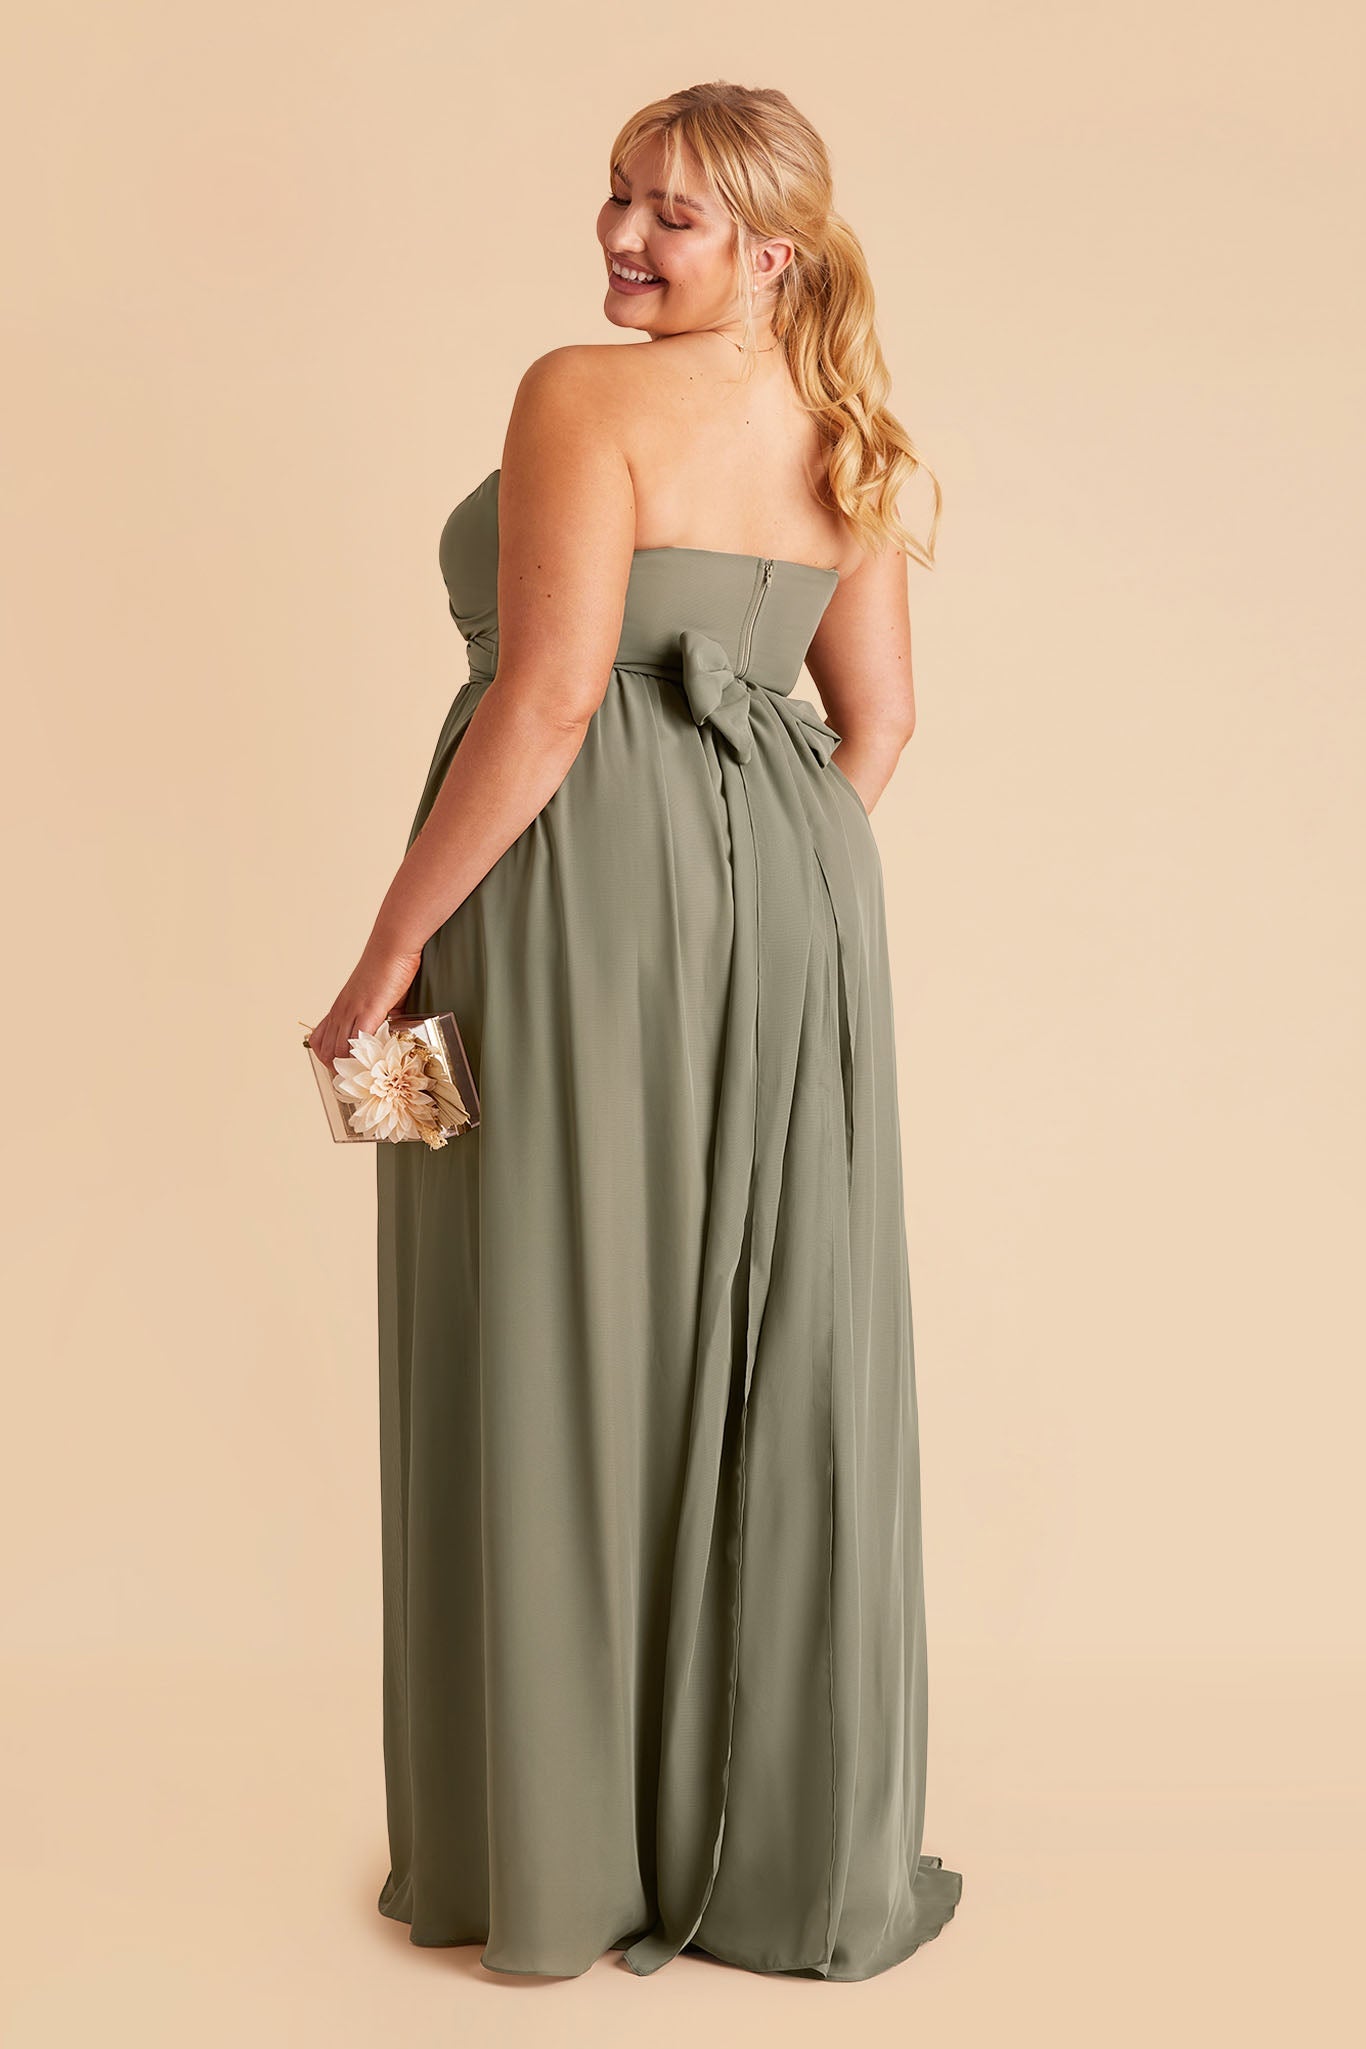 Grace plus size convertible bridesmaid dress in Moss Green Chiffon by Birdy Grey, back view